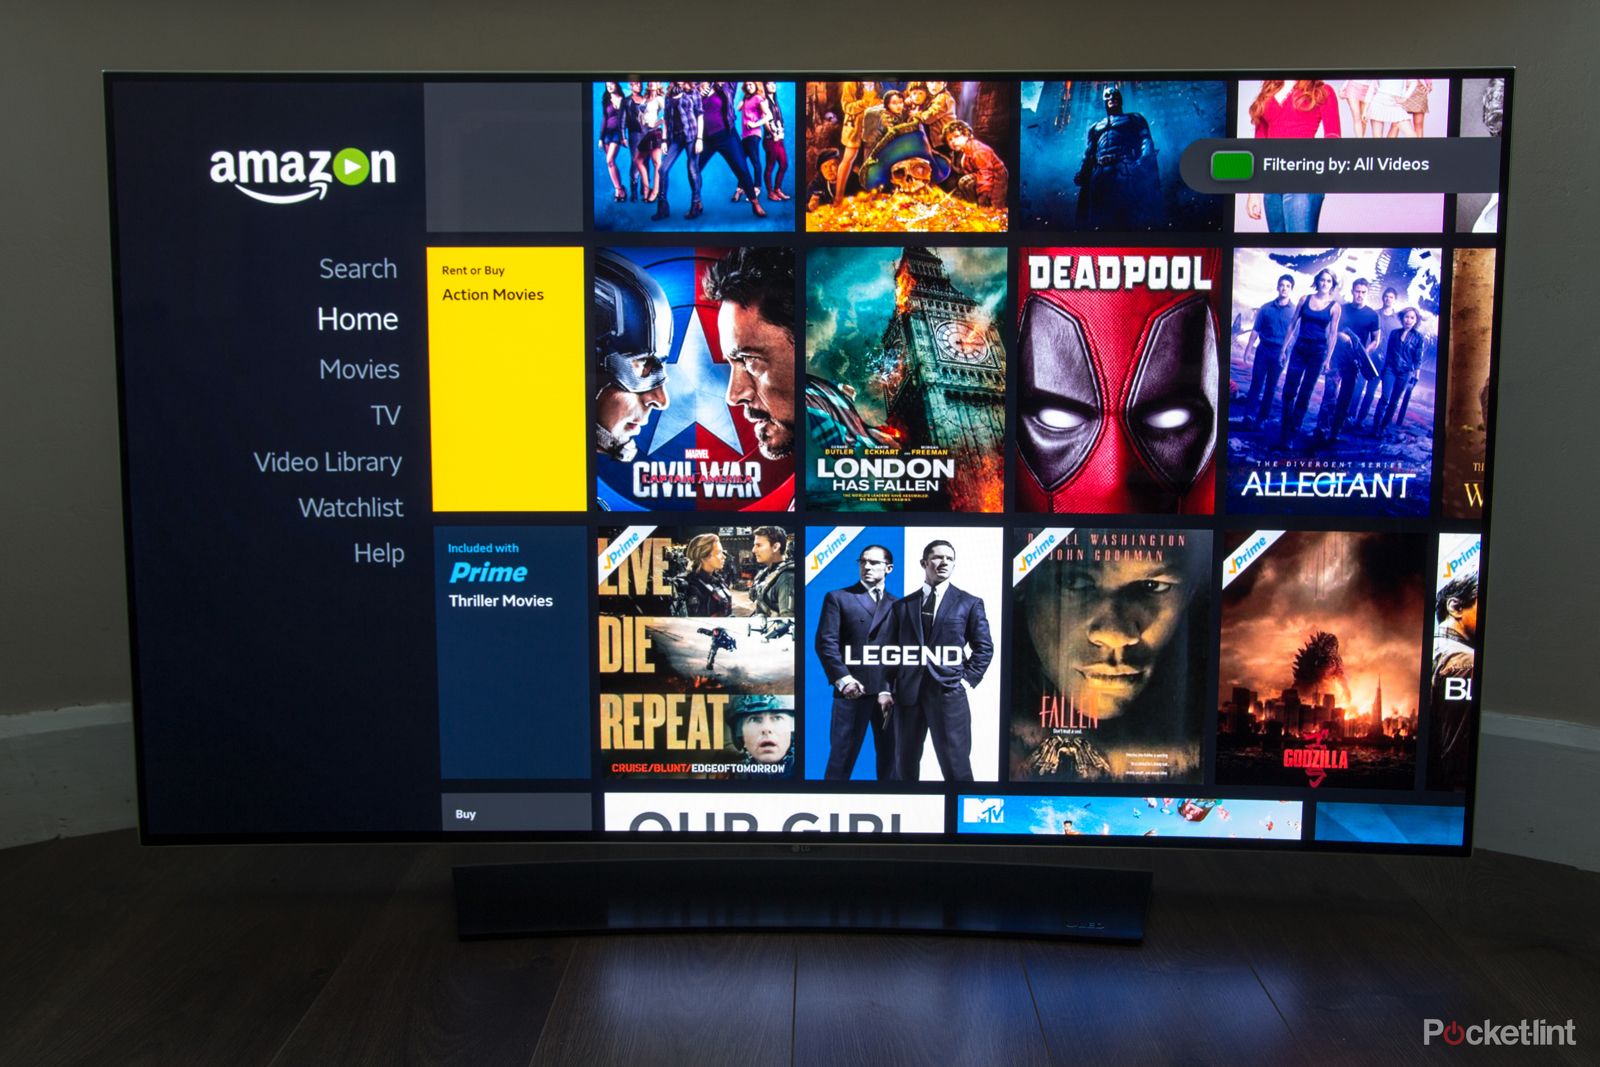 5 reasons to buy a Samsung TV over an LG TV